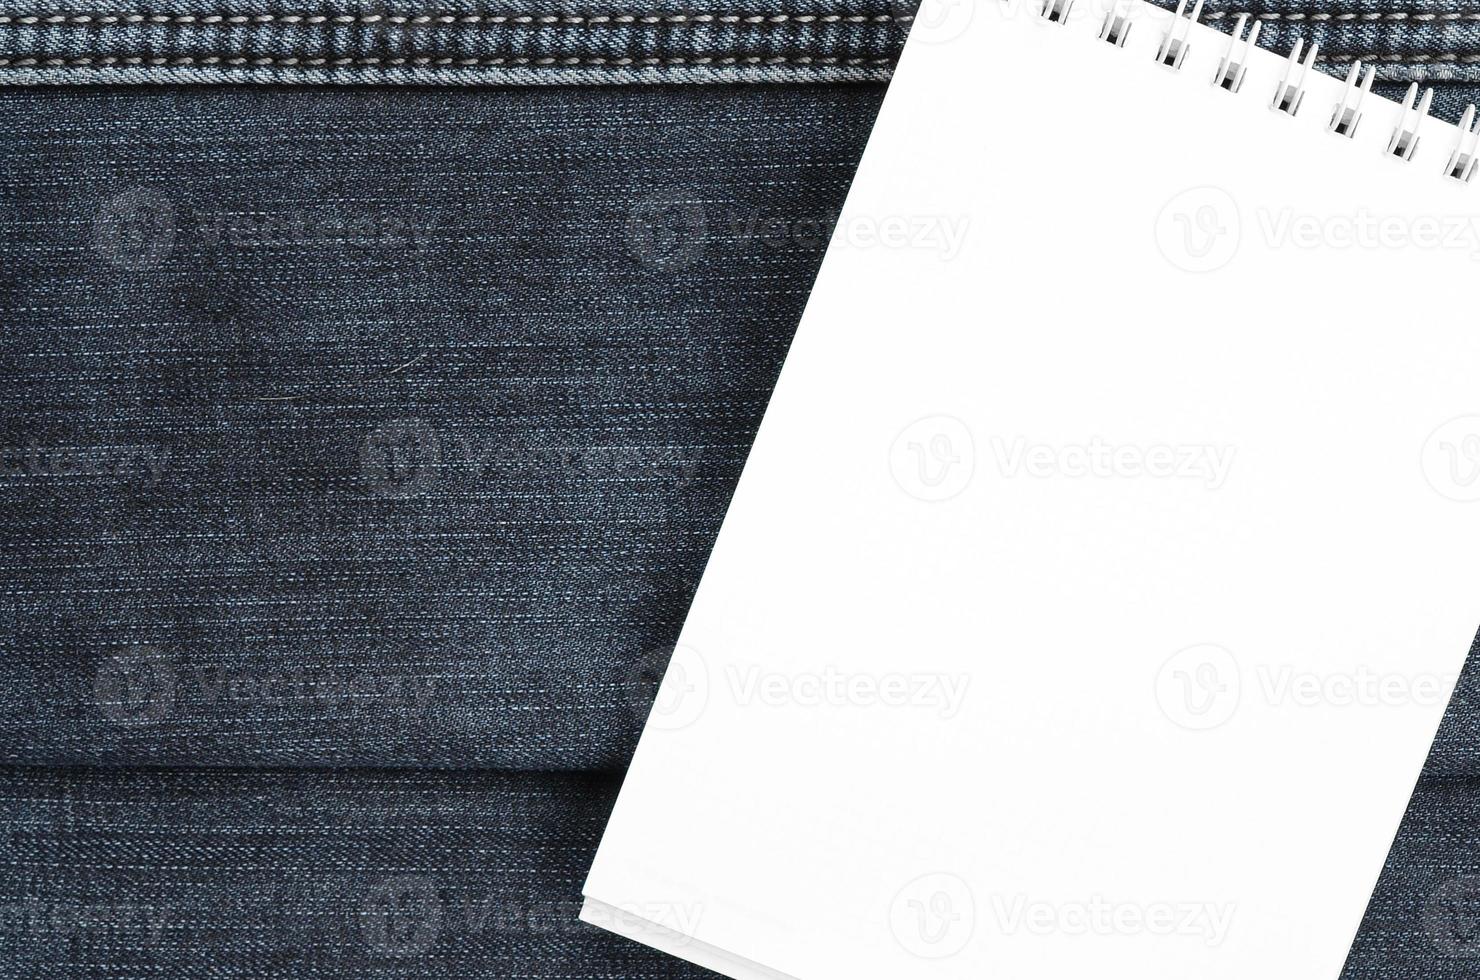 White notebook with clean pages lying on dark blue jeans background. Image with copy space photo